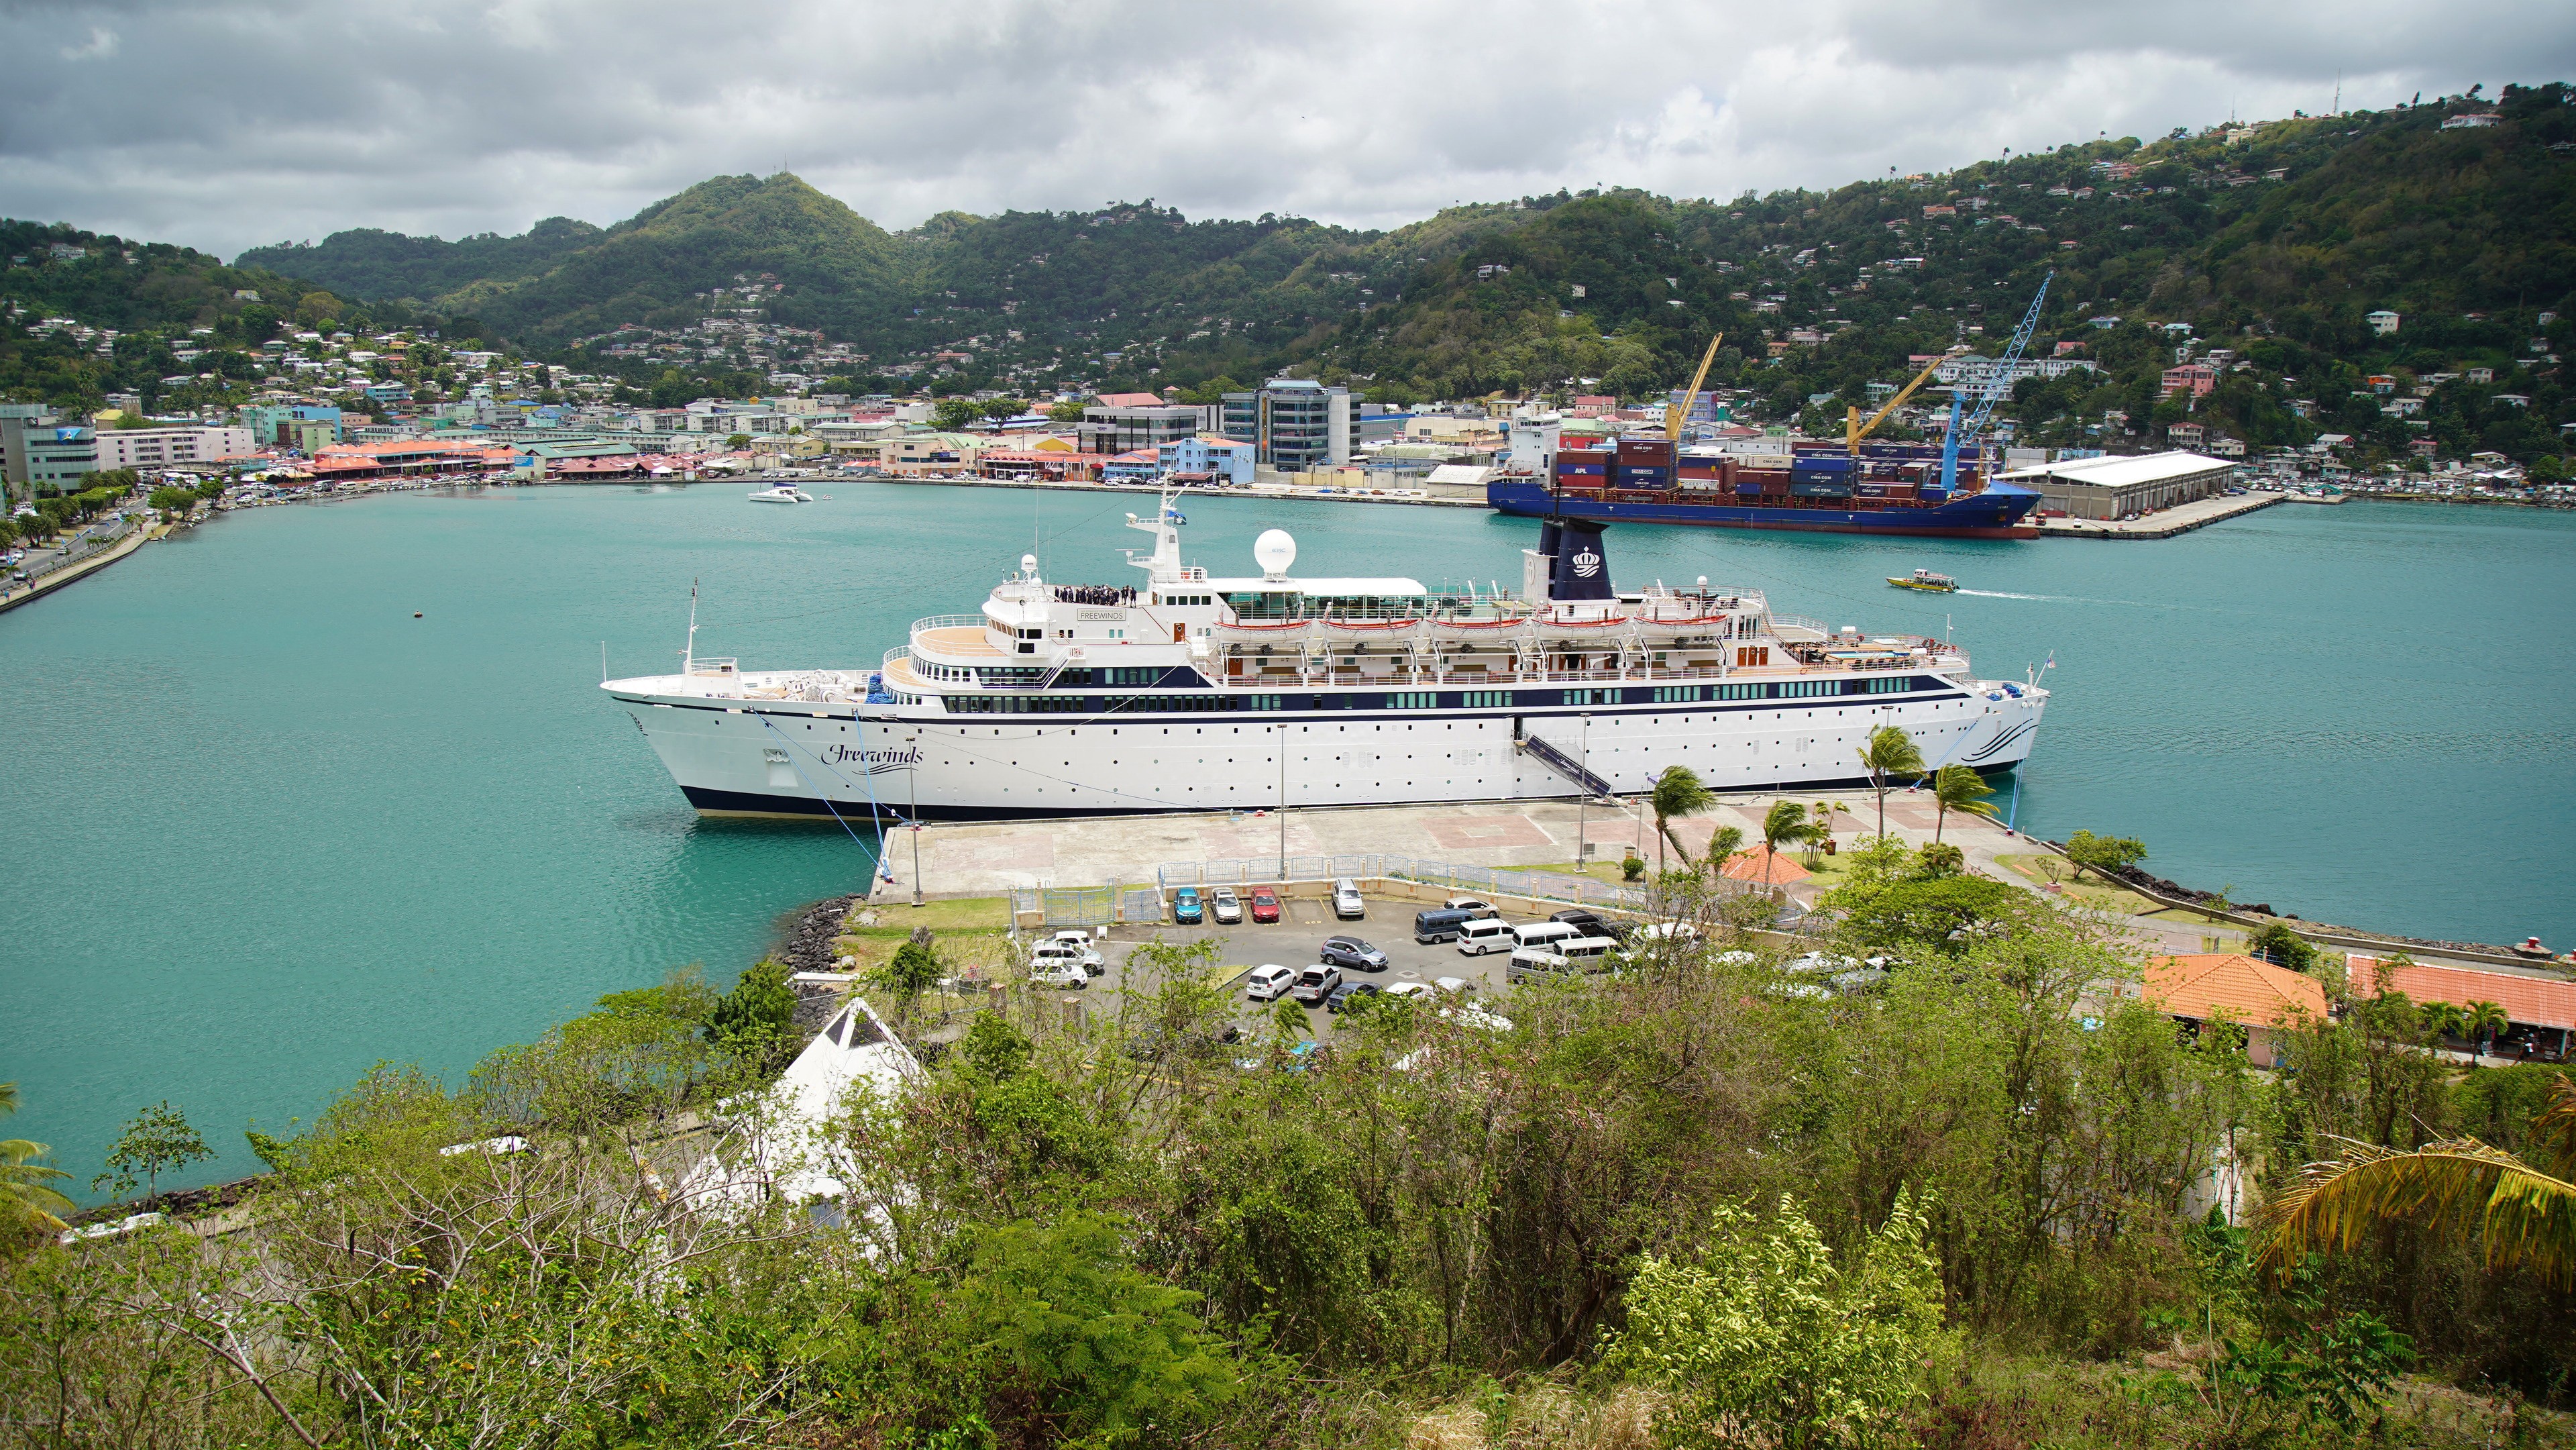 The Freewinds cruise ship is docked at the port of Castries, the capital of St Lucia on Thursday. Photo: AP